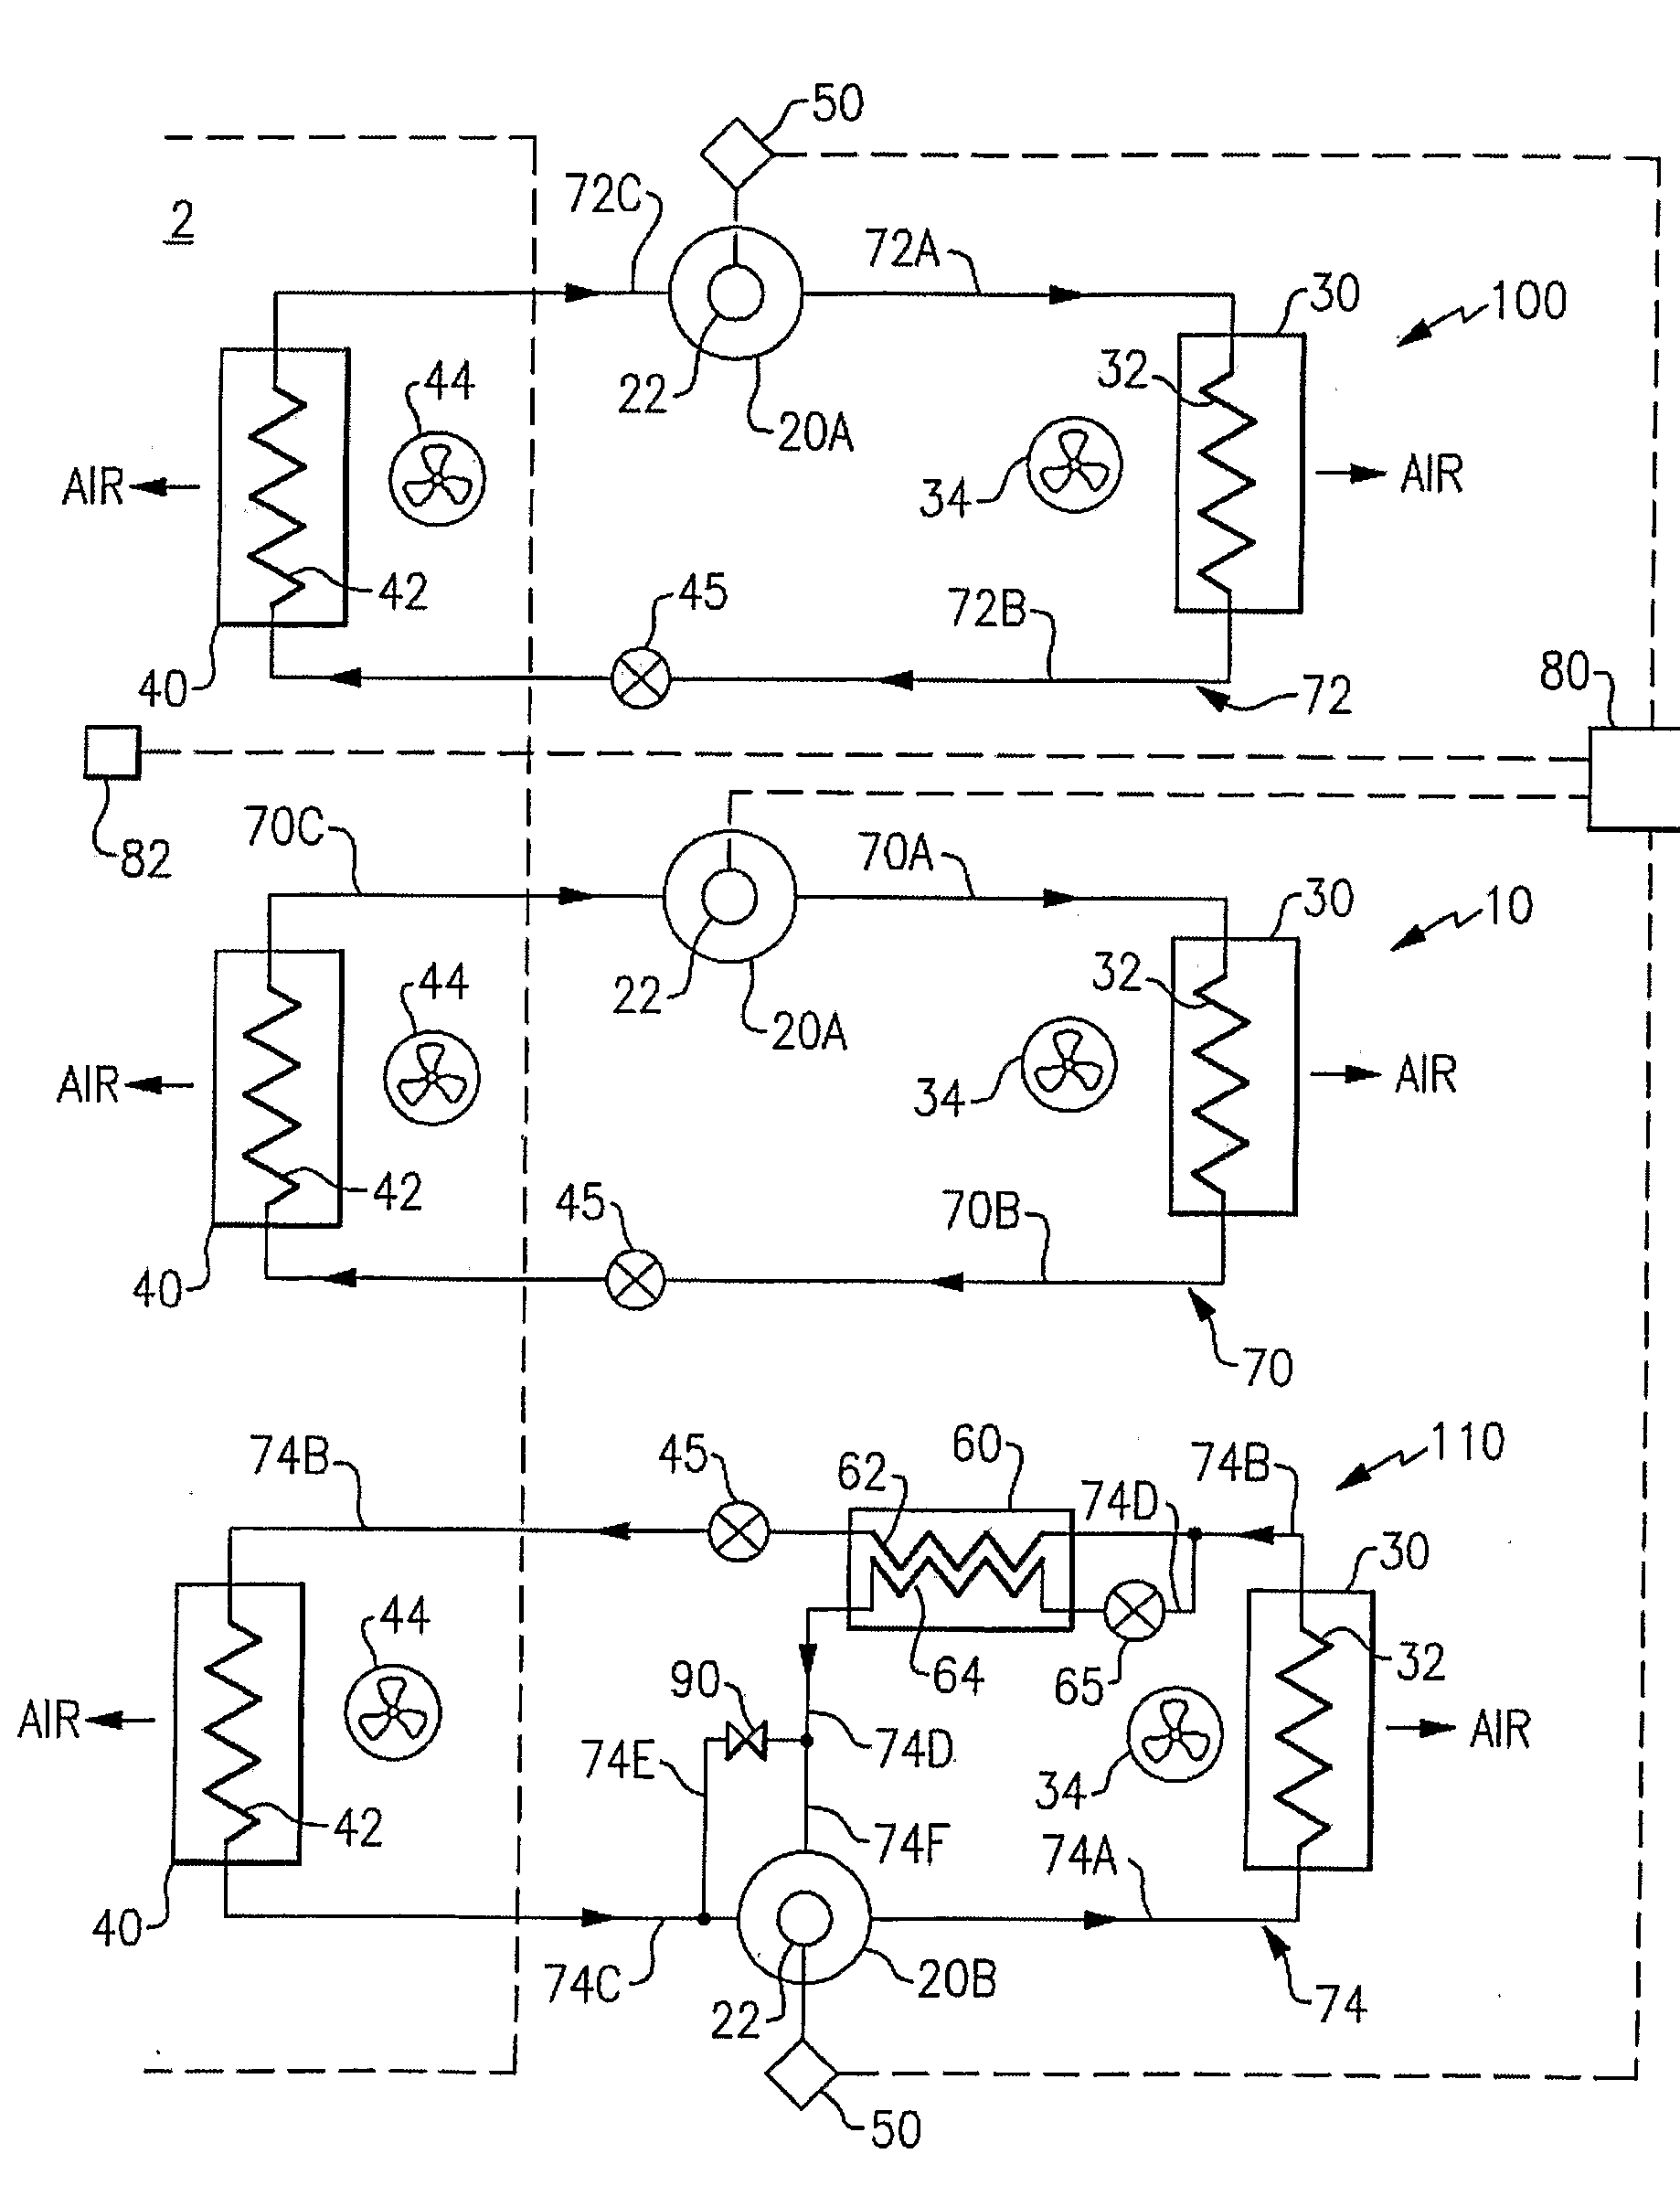 Variable Capacity Multiple Circuit Air Conditioning System